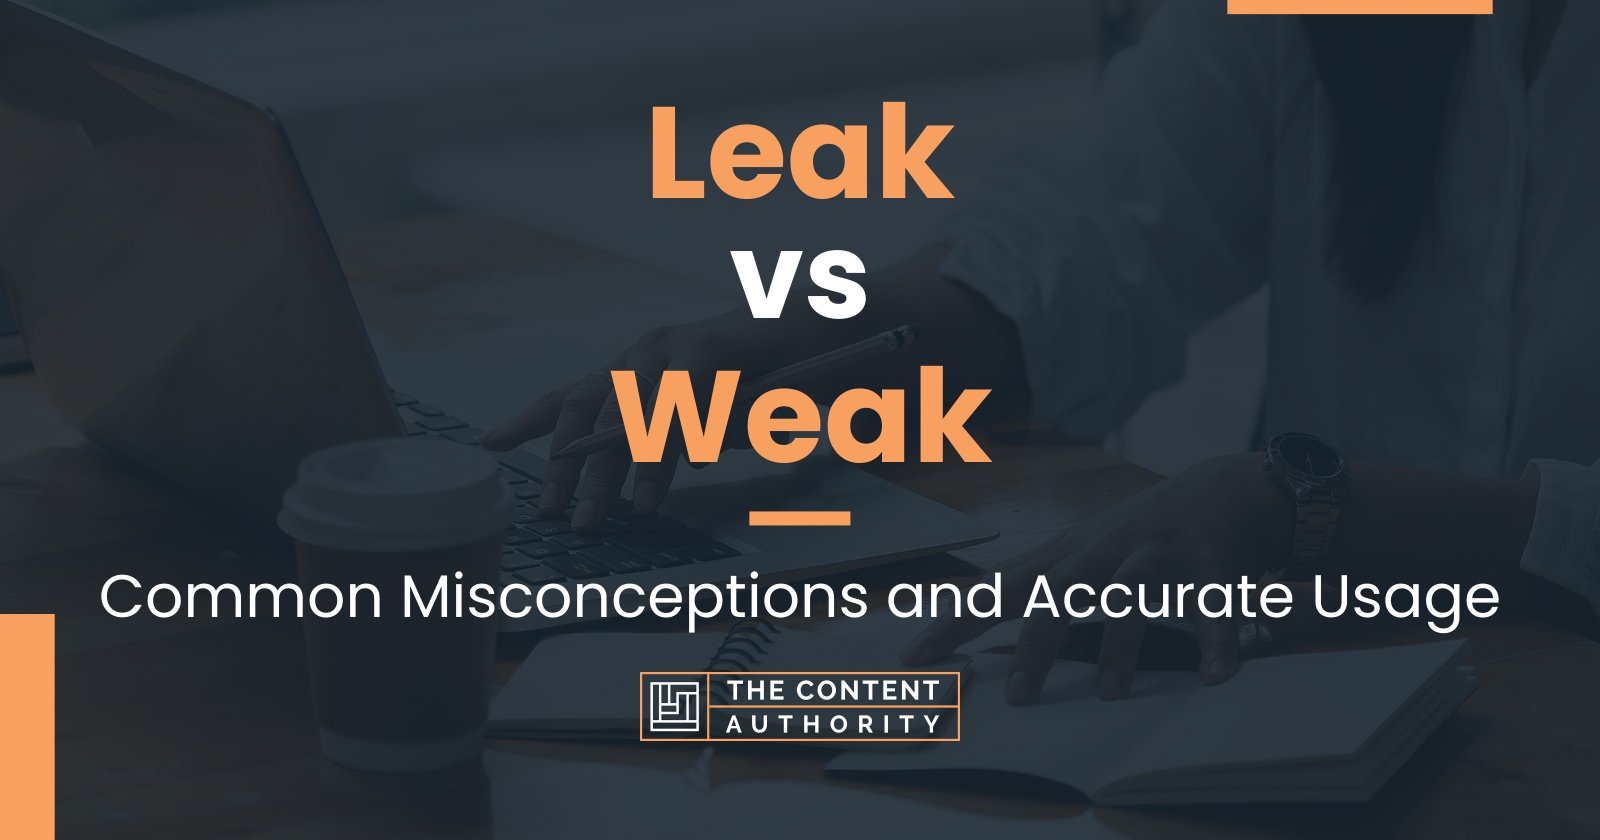 Leak vs Weak: Common Misconceptions and Accurate Usage